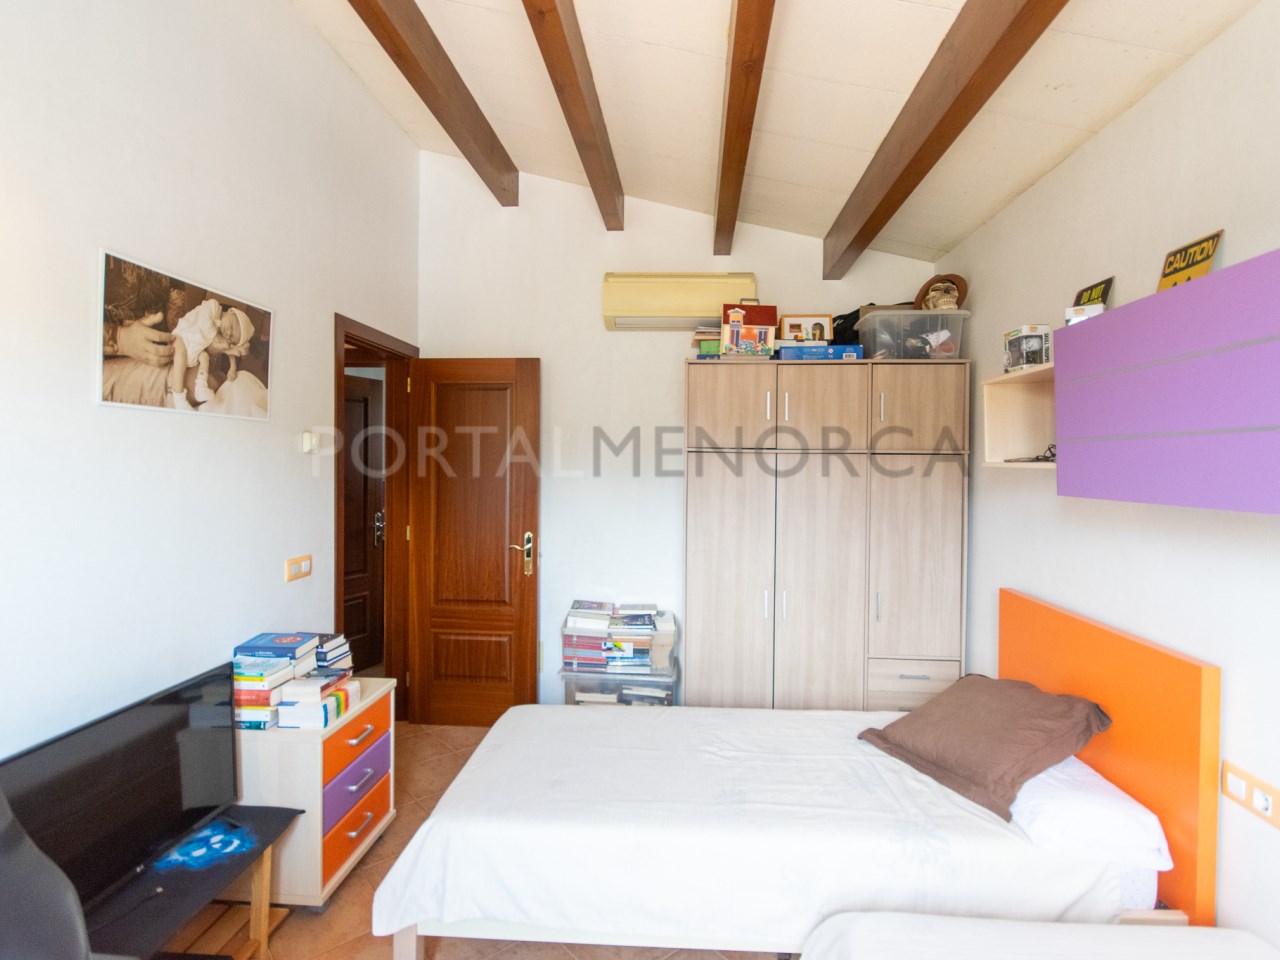 Double room in a Menorcan house with pool and garage in Mercadal